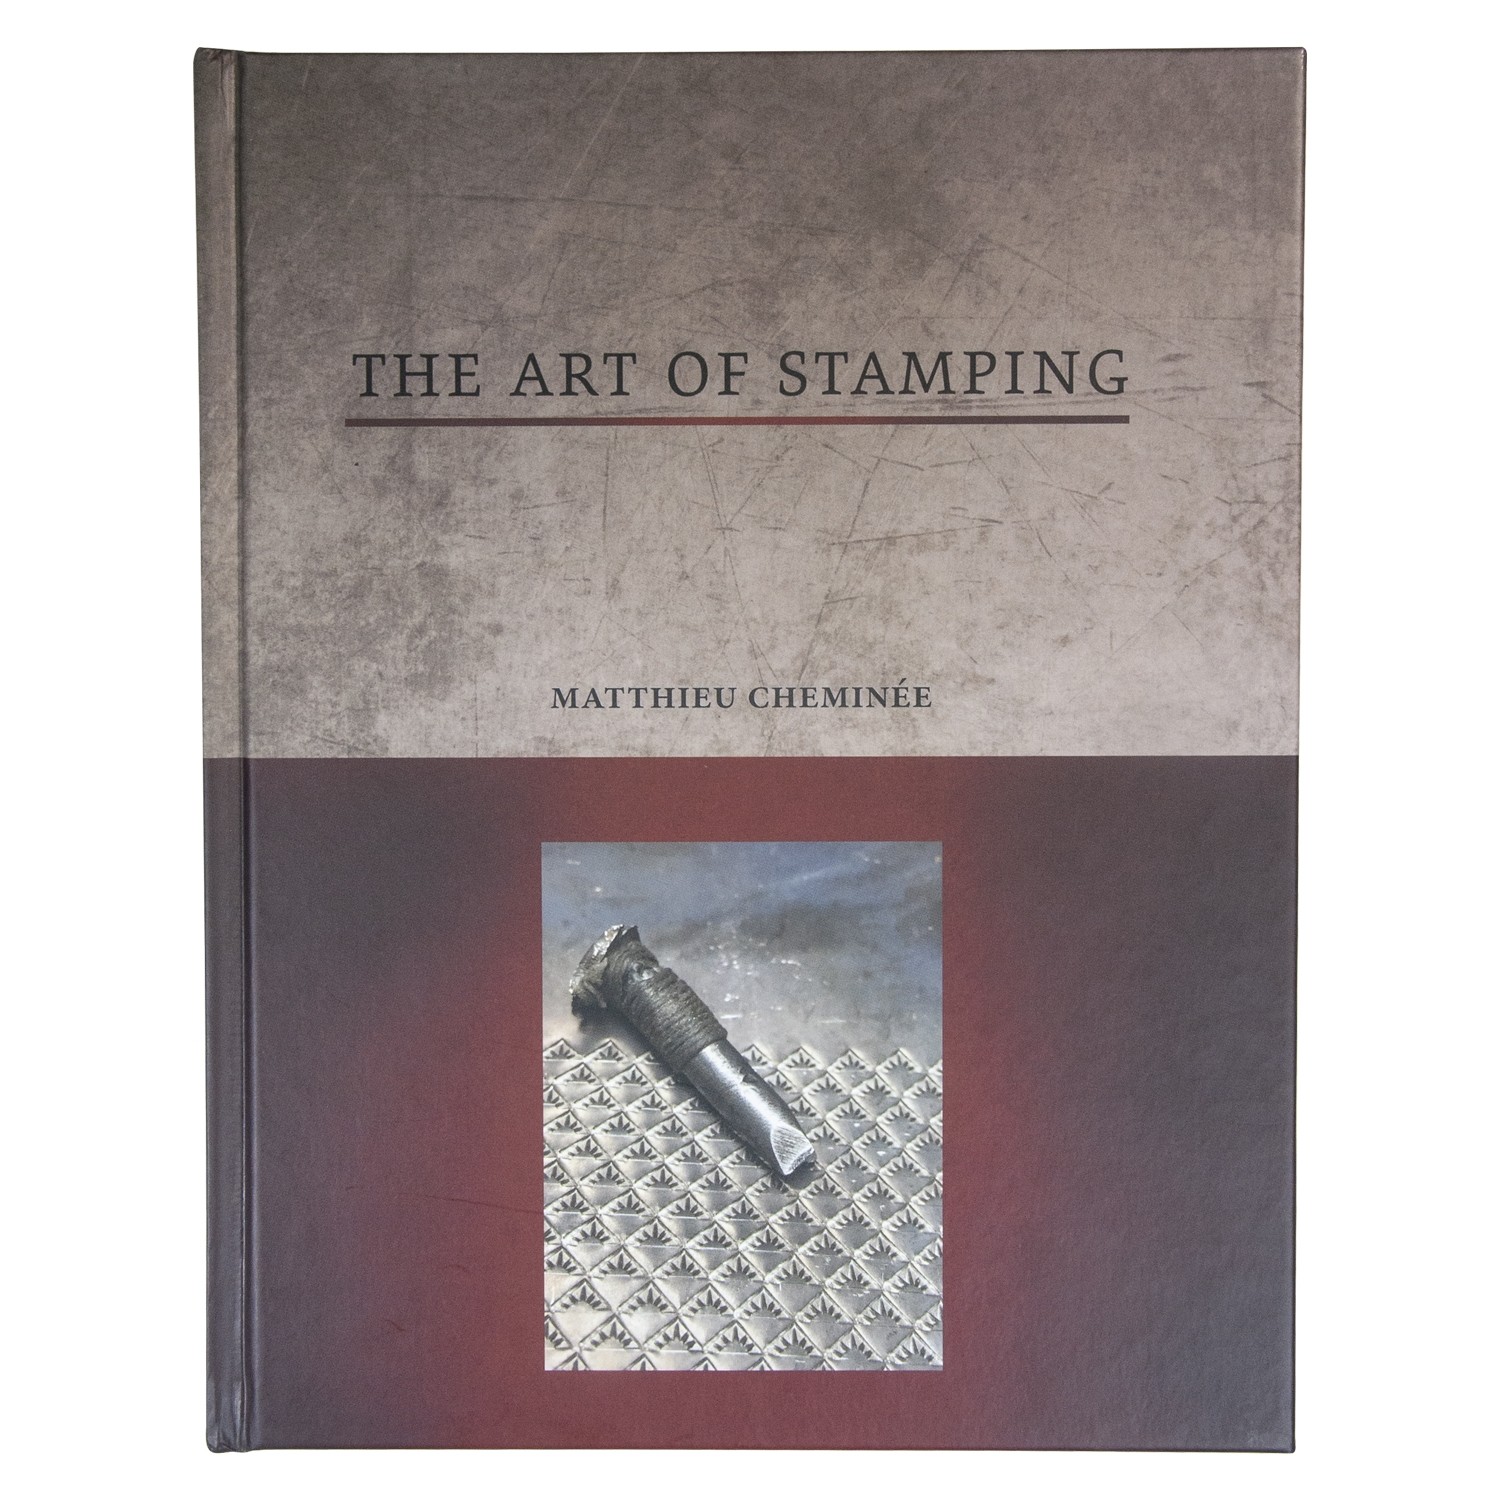 The Art of Stamping Book by Matthieu Cheminée